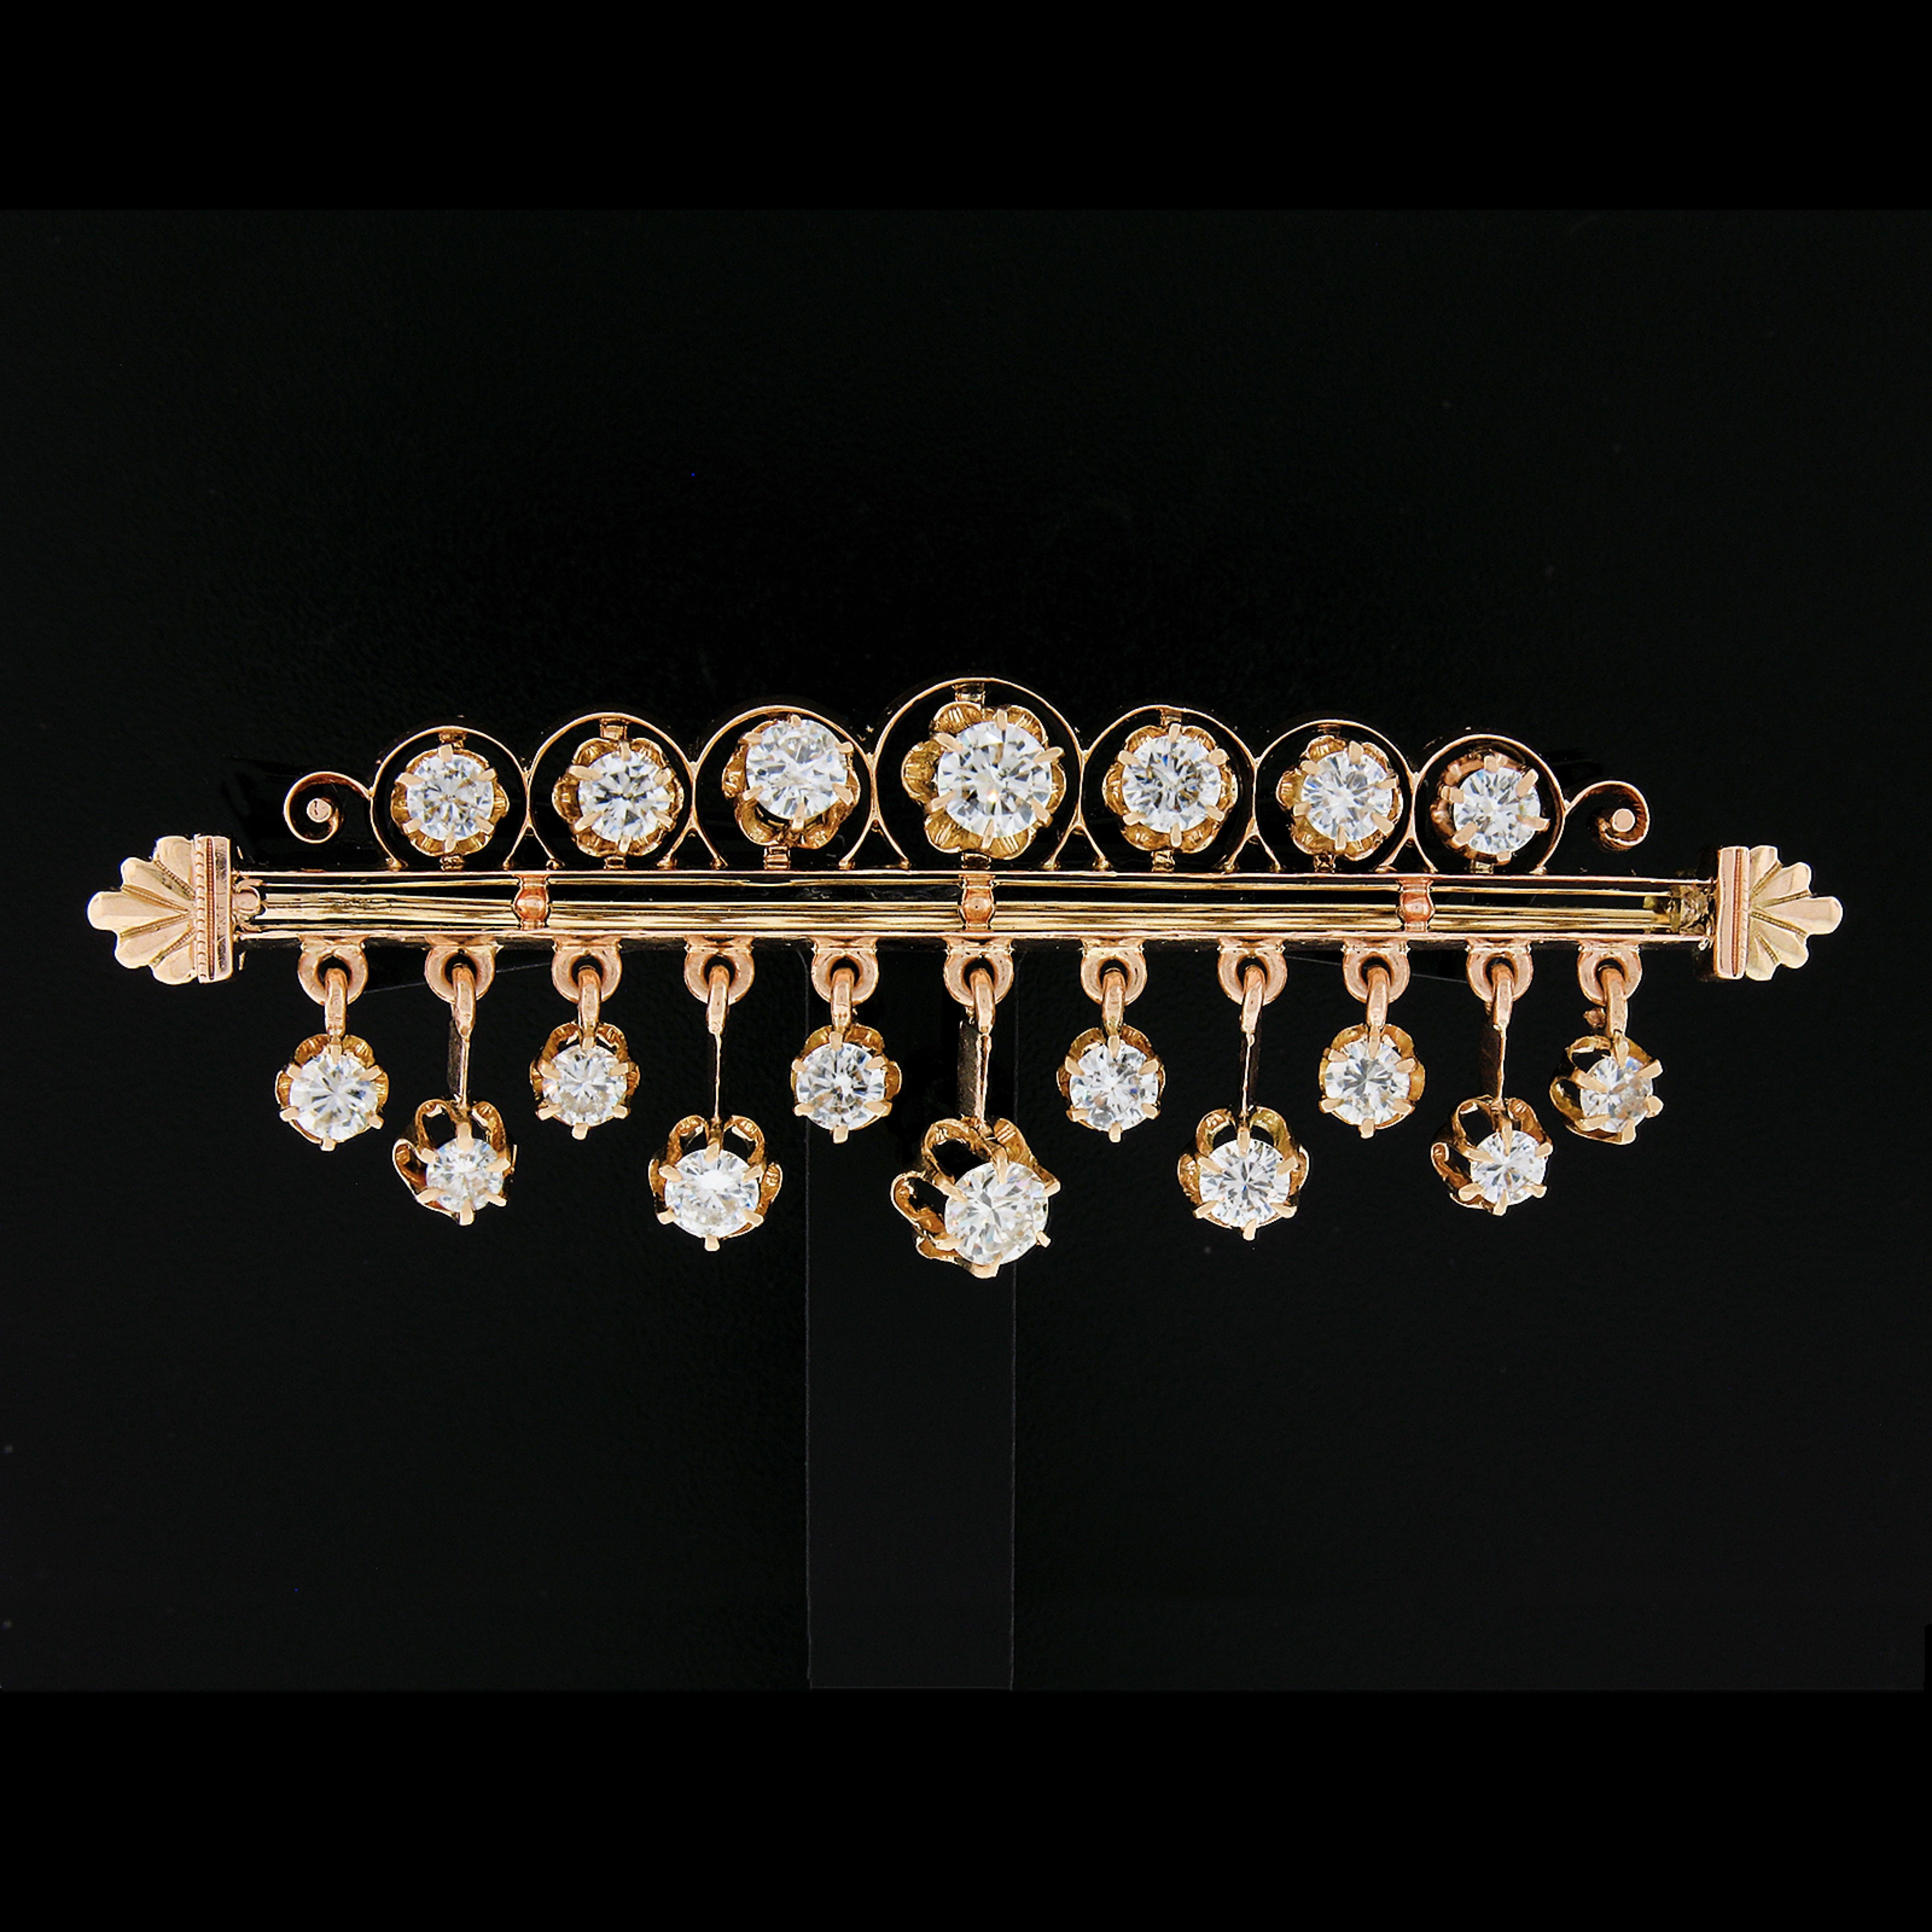 Here we have an absolutely magnificent Victorian revival diamond dangle bar pin crafted in solid 18k rosy yellow gold. The pin features two straight bars that carry 18 round brilliants and old transitional cut diamonds, all prong set in beautiful